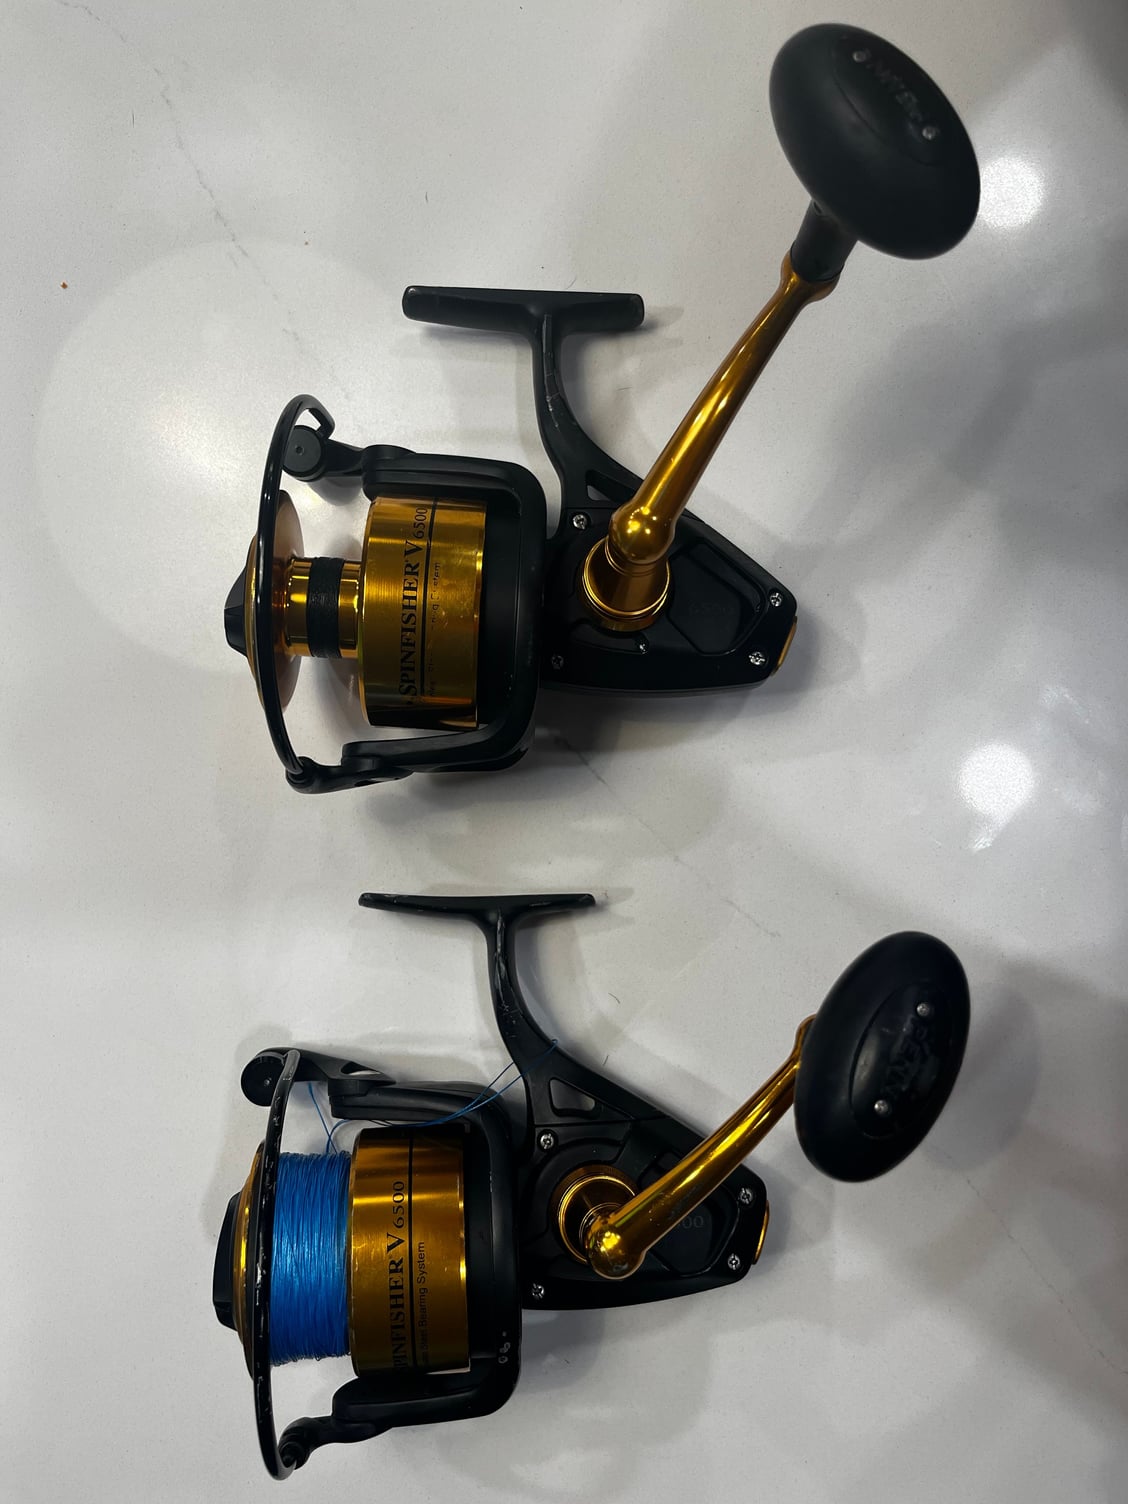 Penn Spinfisher V 6500 reels - The Hull Truth - Boating and